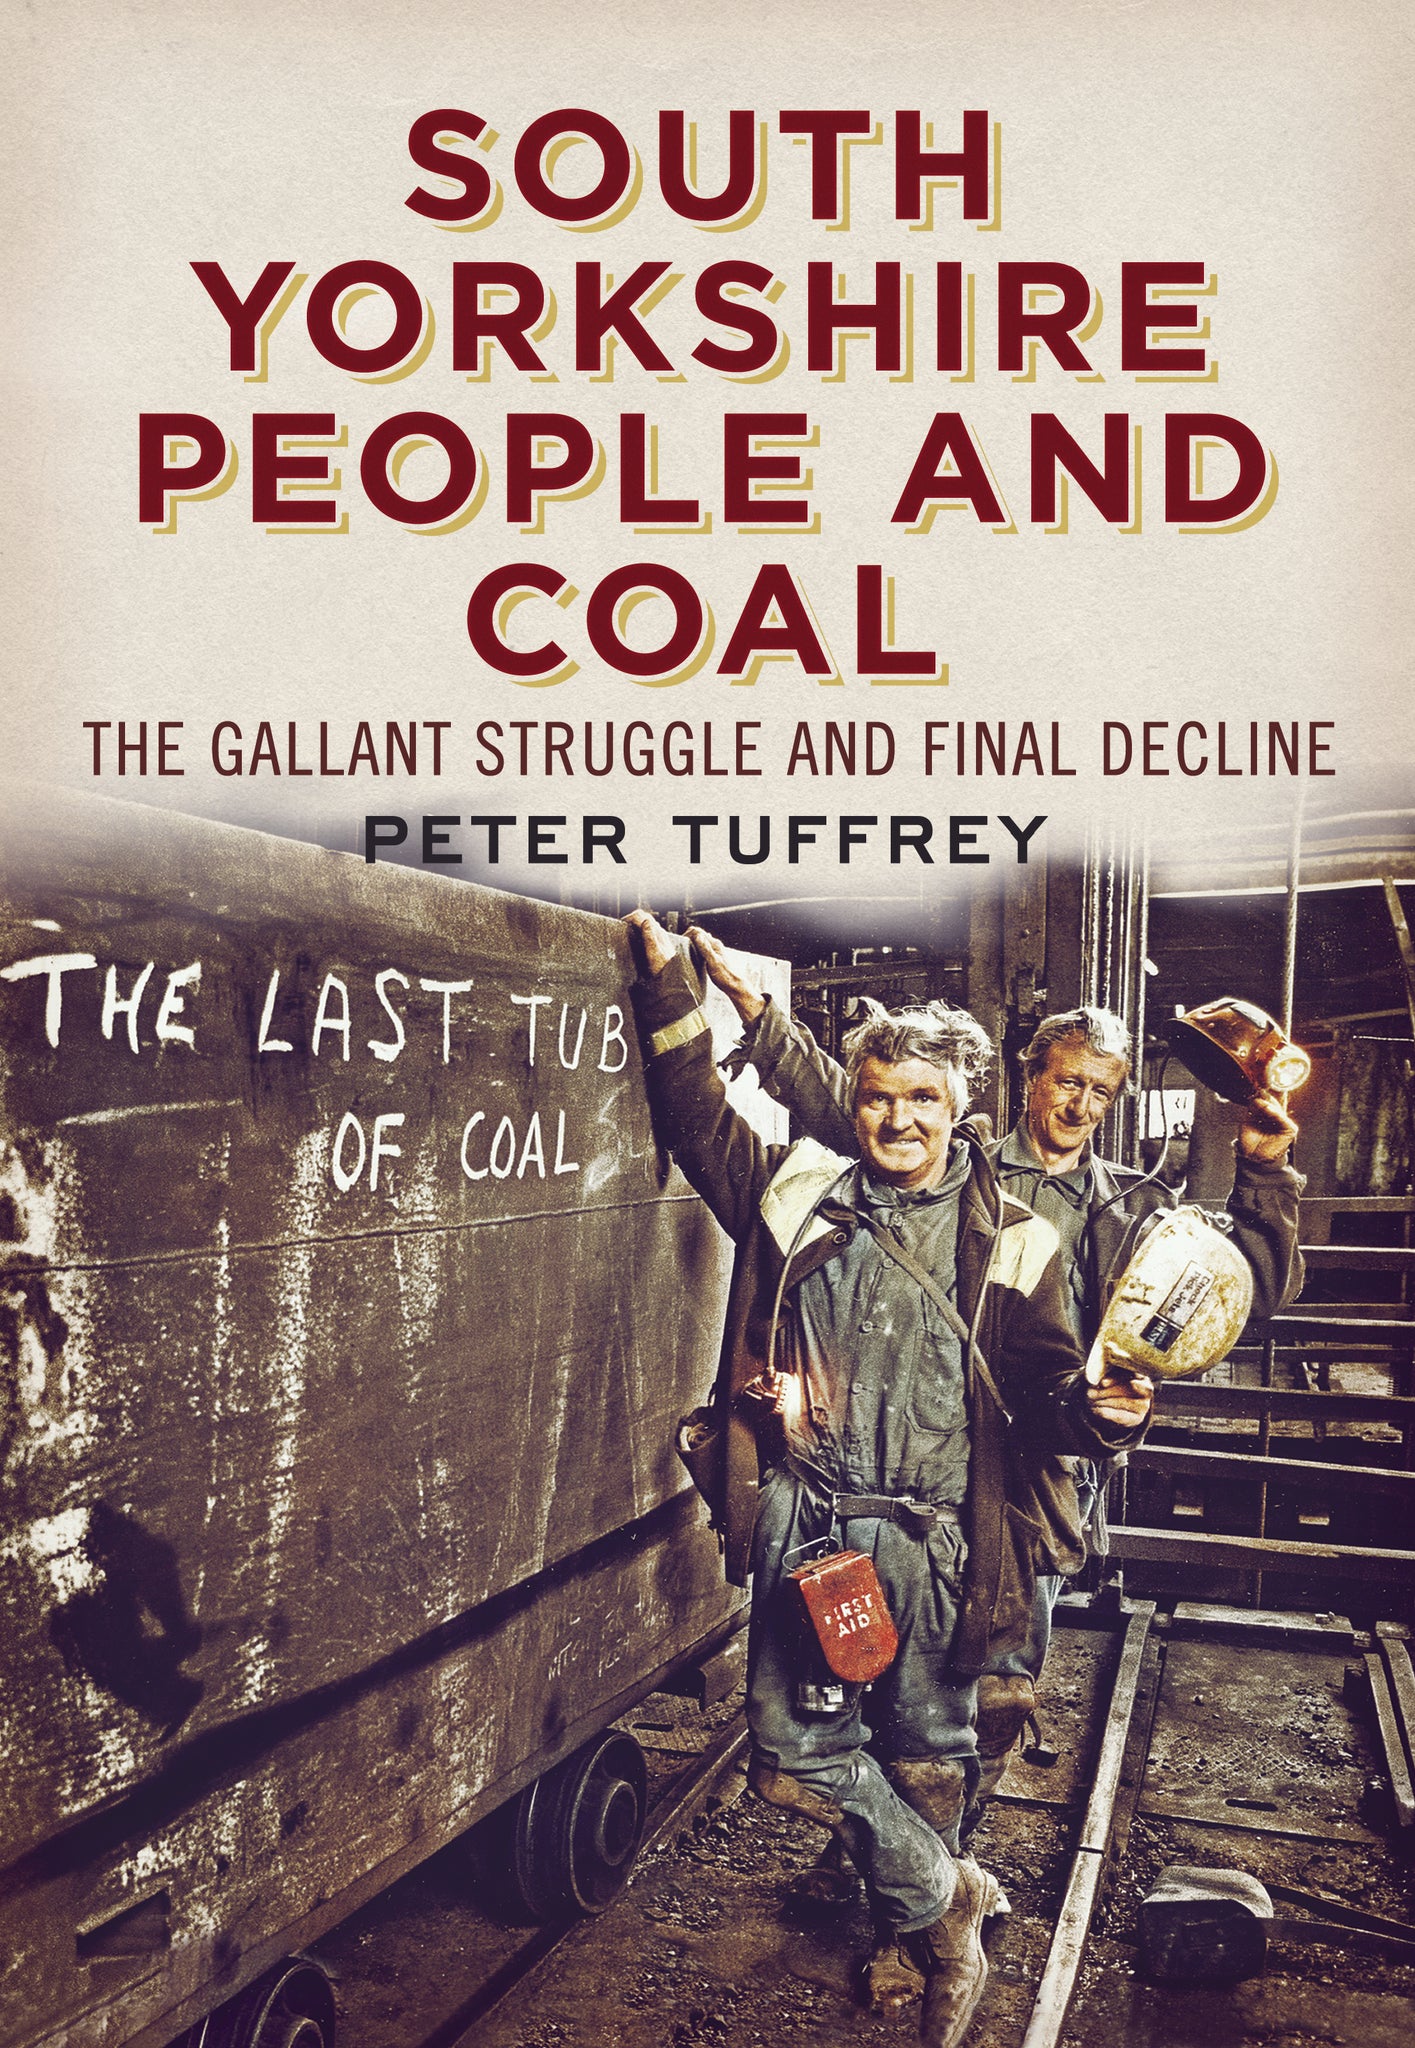 South Yorkshire People and Coal: The Gallant Struggle and Final Decline